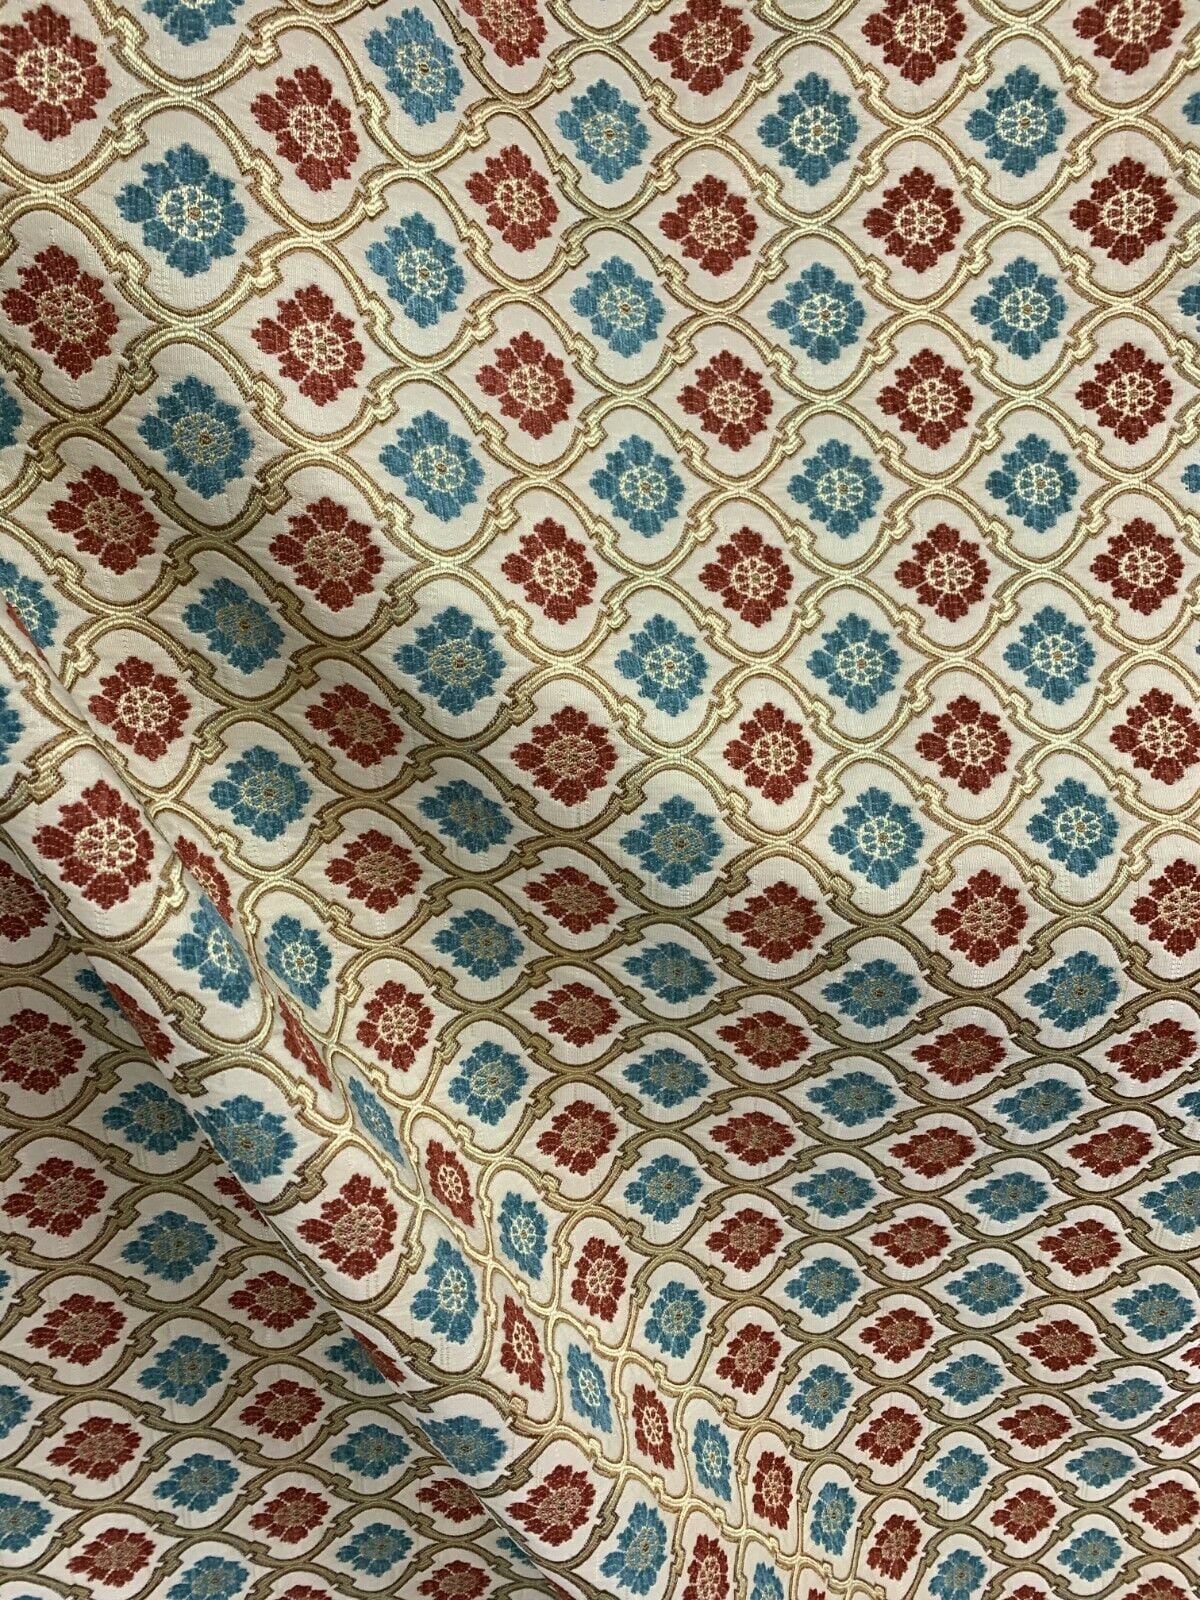 RED BLUE GOLD Floral Trellis Chenille Upholstery Brocade Fabric (56 in.) Sold By The Yard